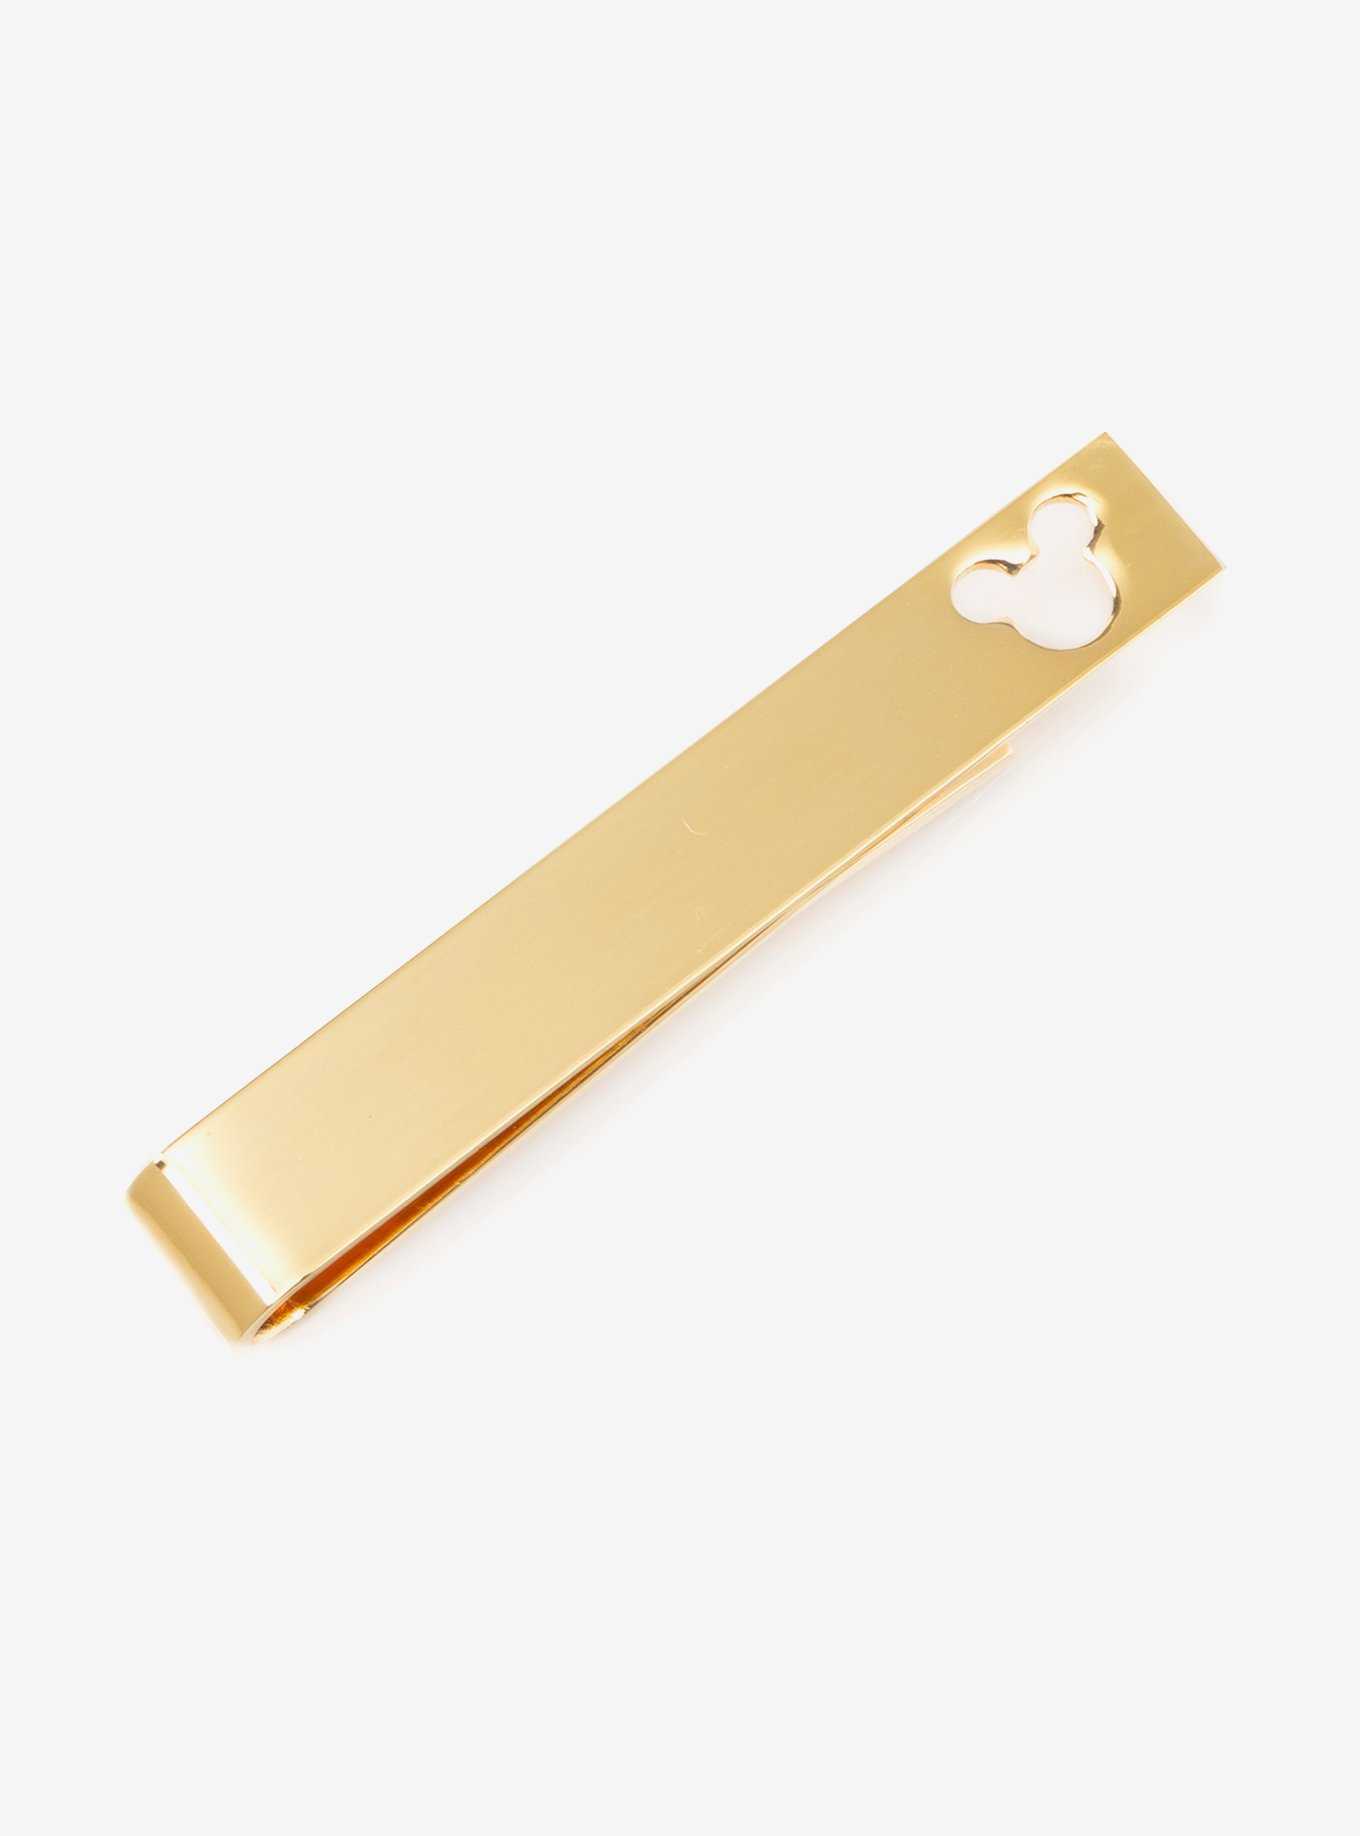 Disney Mickey Mouse Cut Out Gold Tie Bar, , hi-res